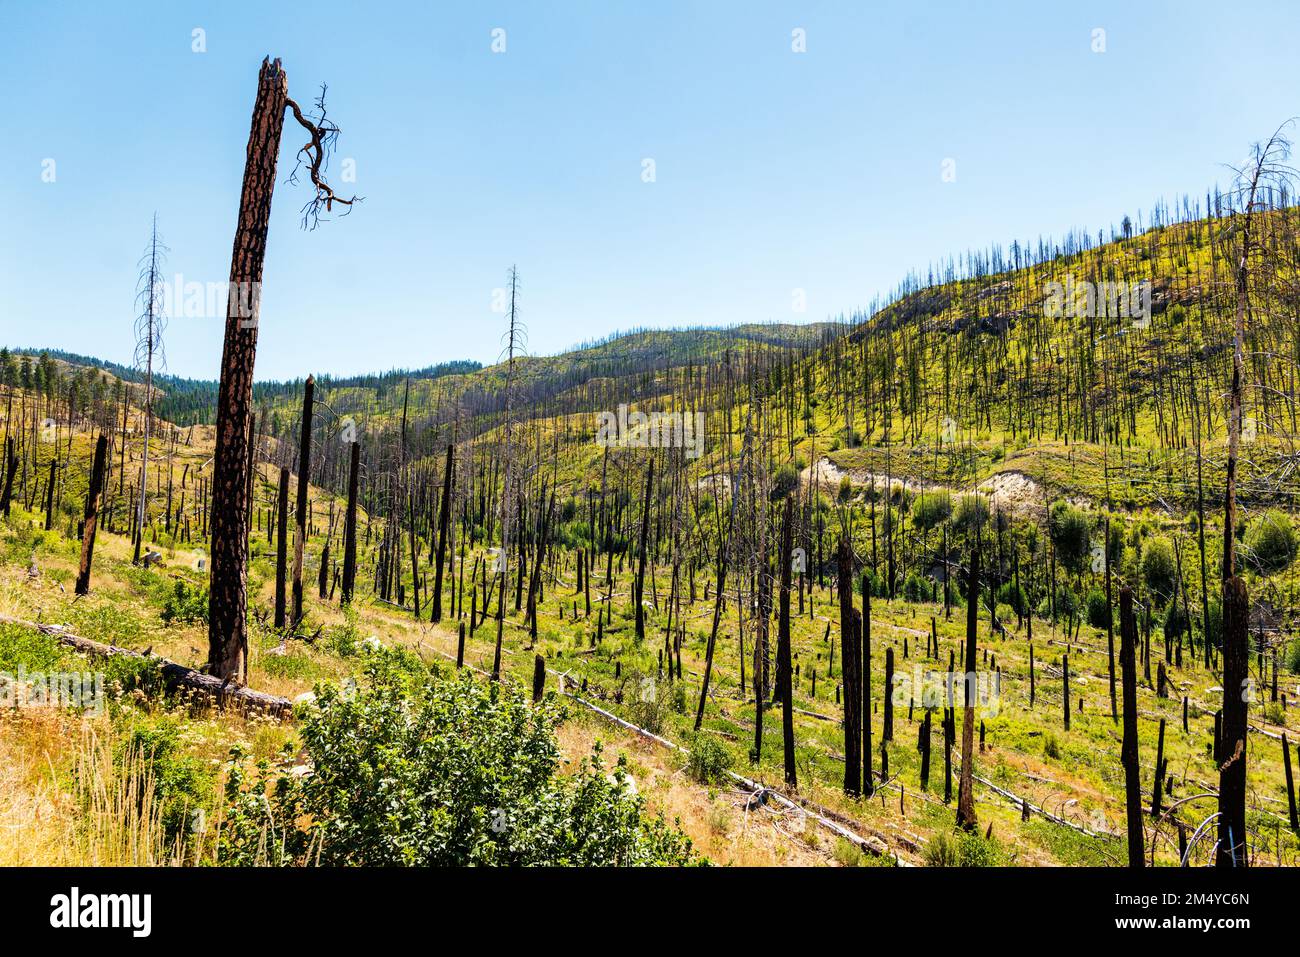 Dead trees; regeneration of trees & plants that burned in forest fire; central Washington state; USA Stock Photo